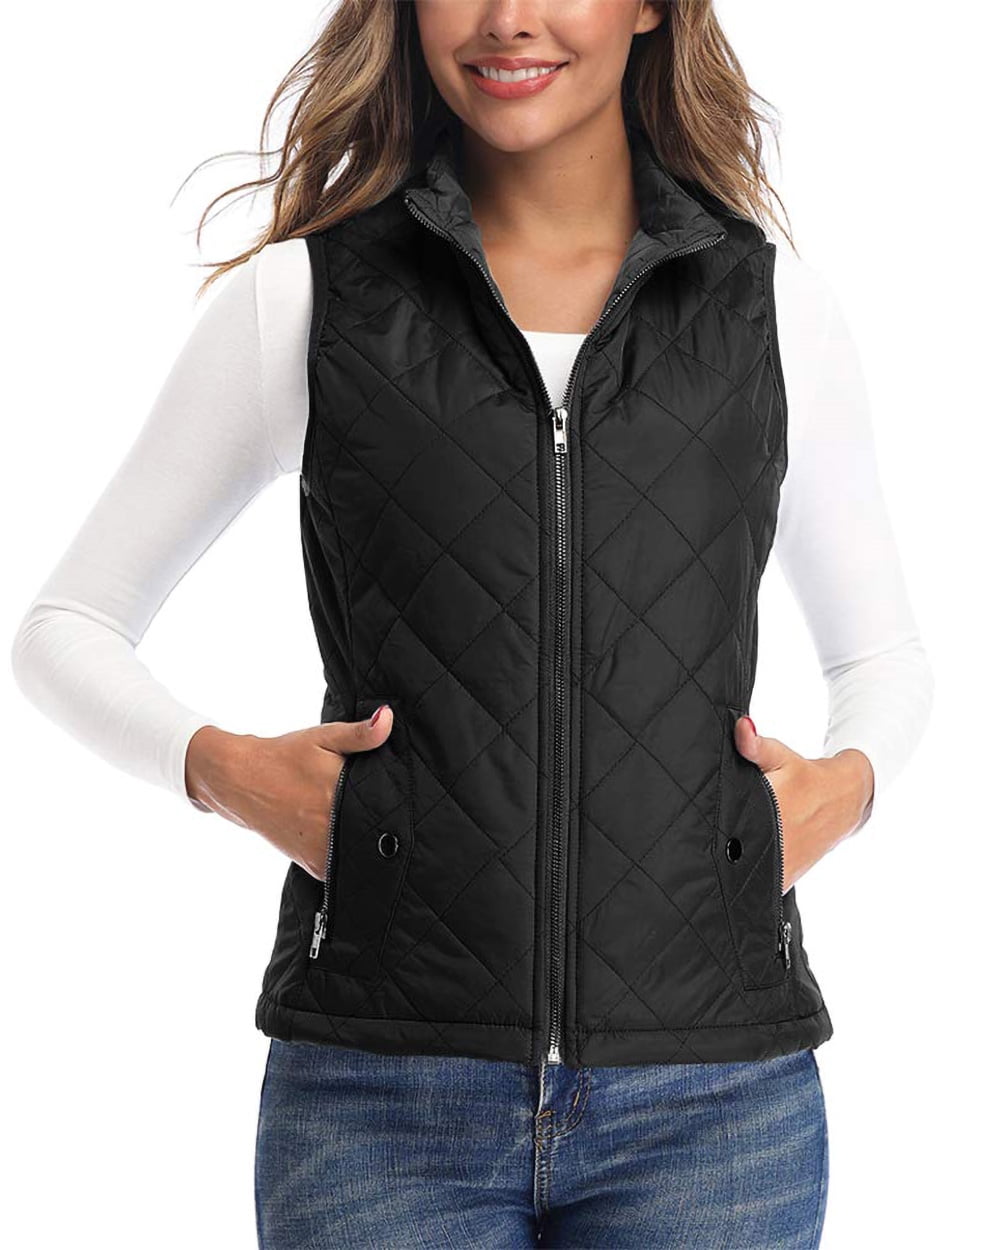 Art3d Womens Vests Padded Lightweight Vest for Women Stand Collar Quilted Gilet with Zip Pockets